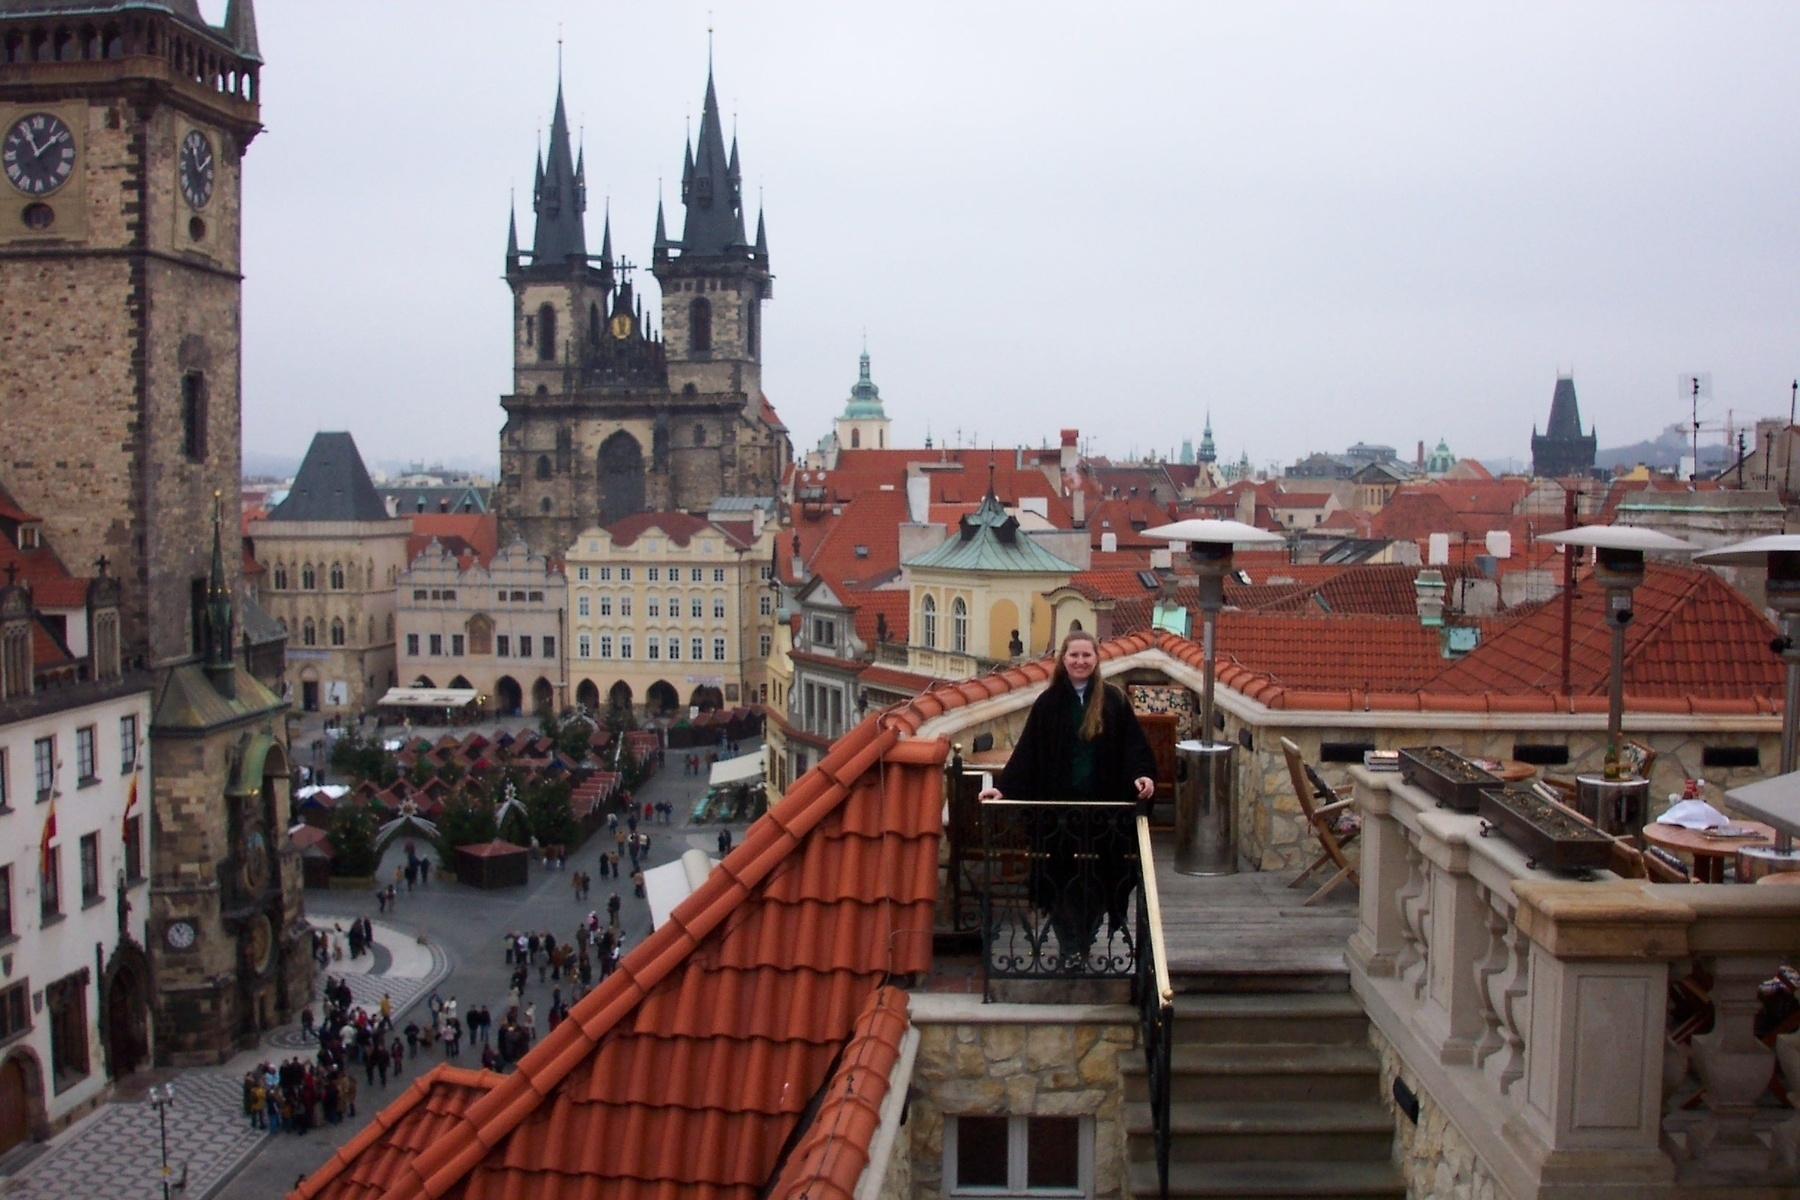 Atop Hotel U Prince, overlooking Old Town Square